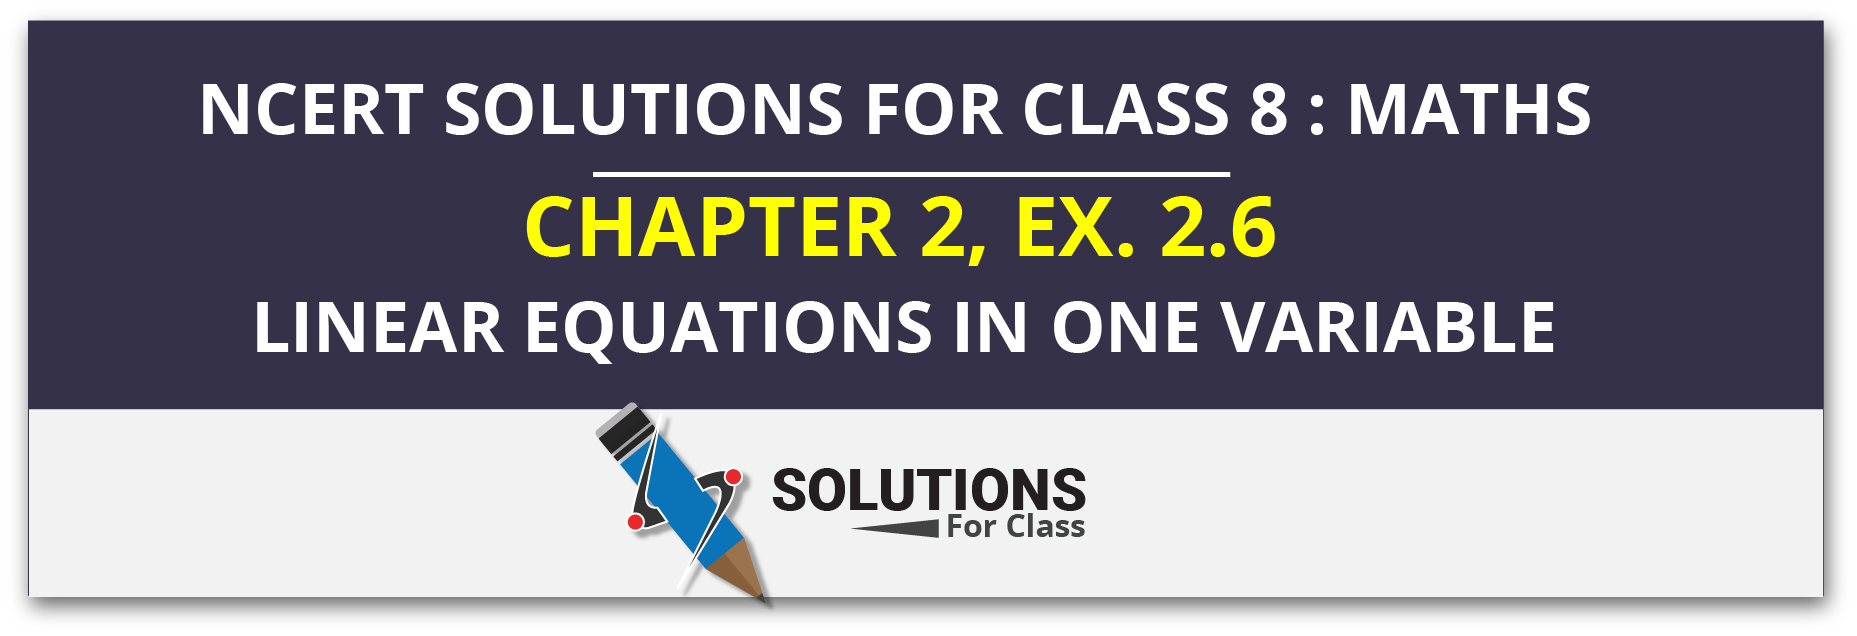 ncert-solution-for-class-8-maths-linear-equations-in-one-variable-exercise-2-6-solutions